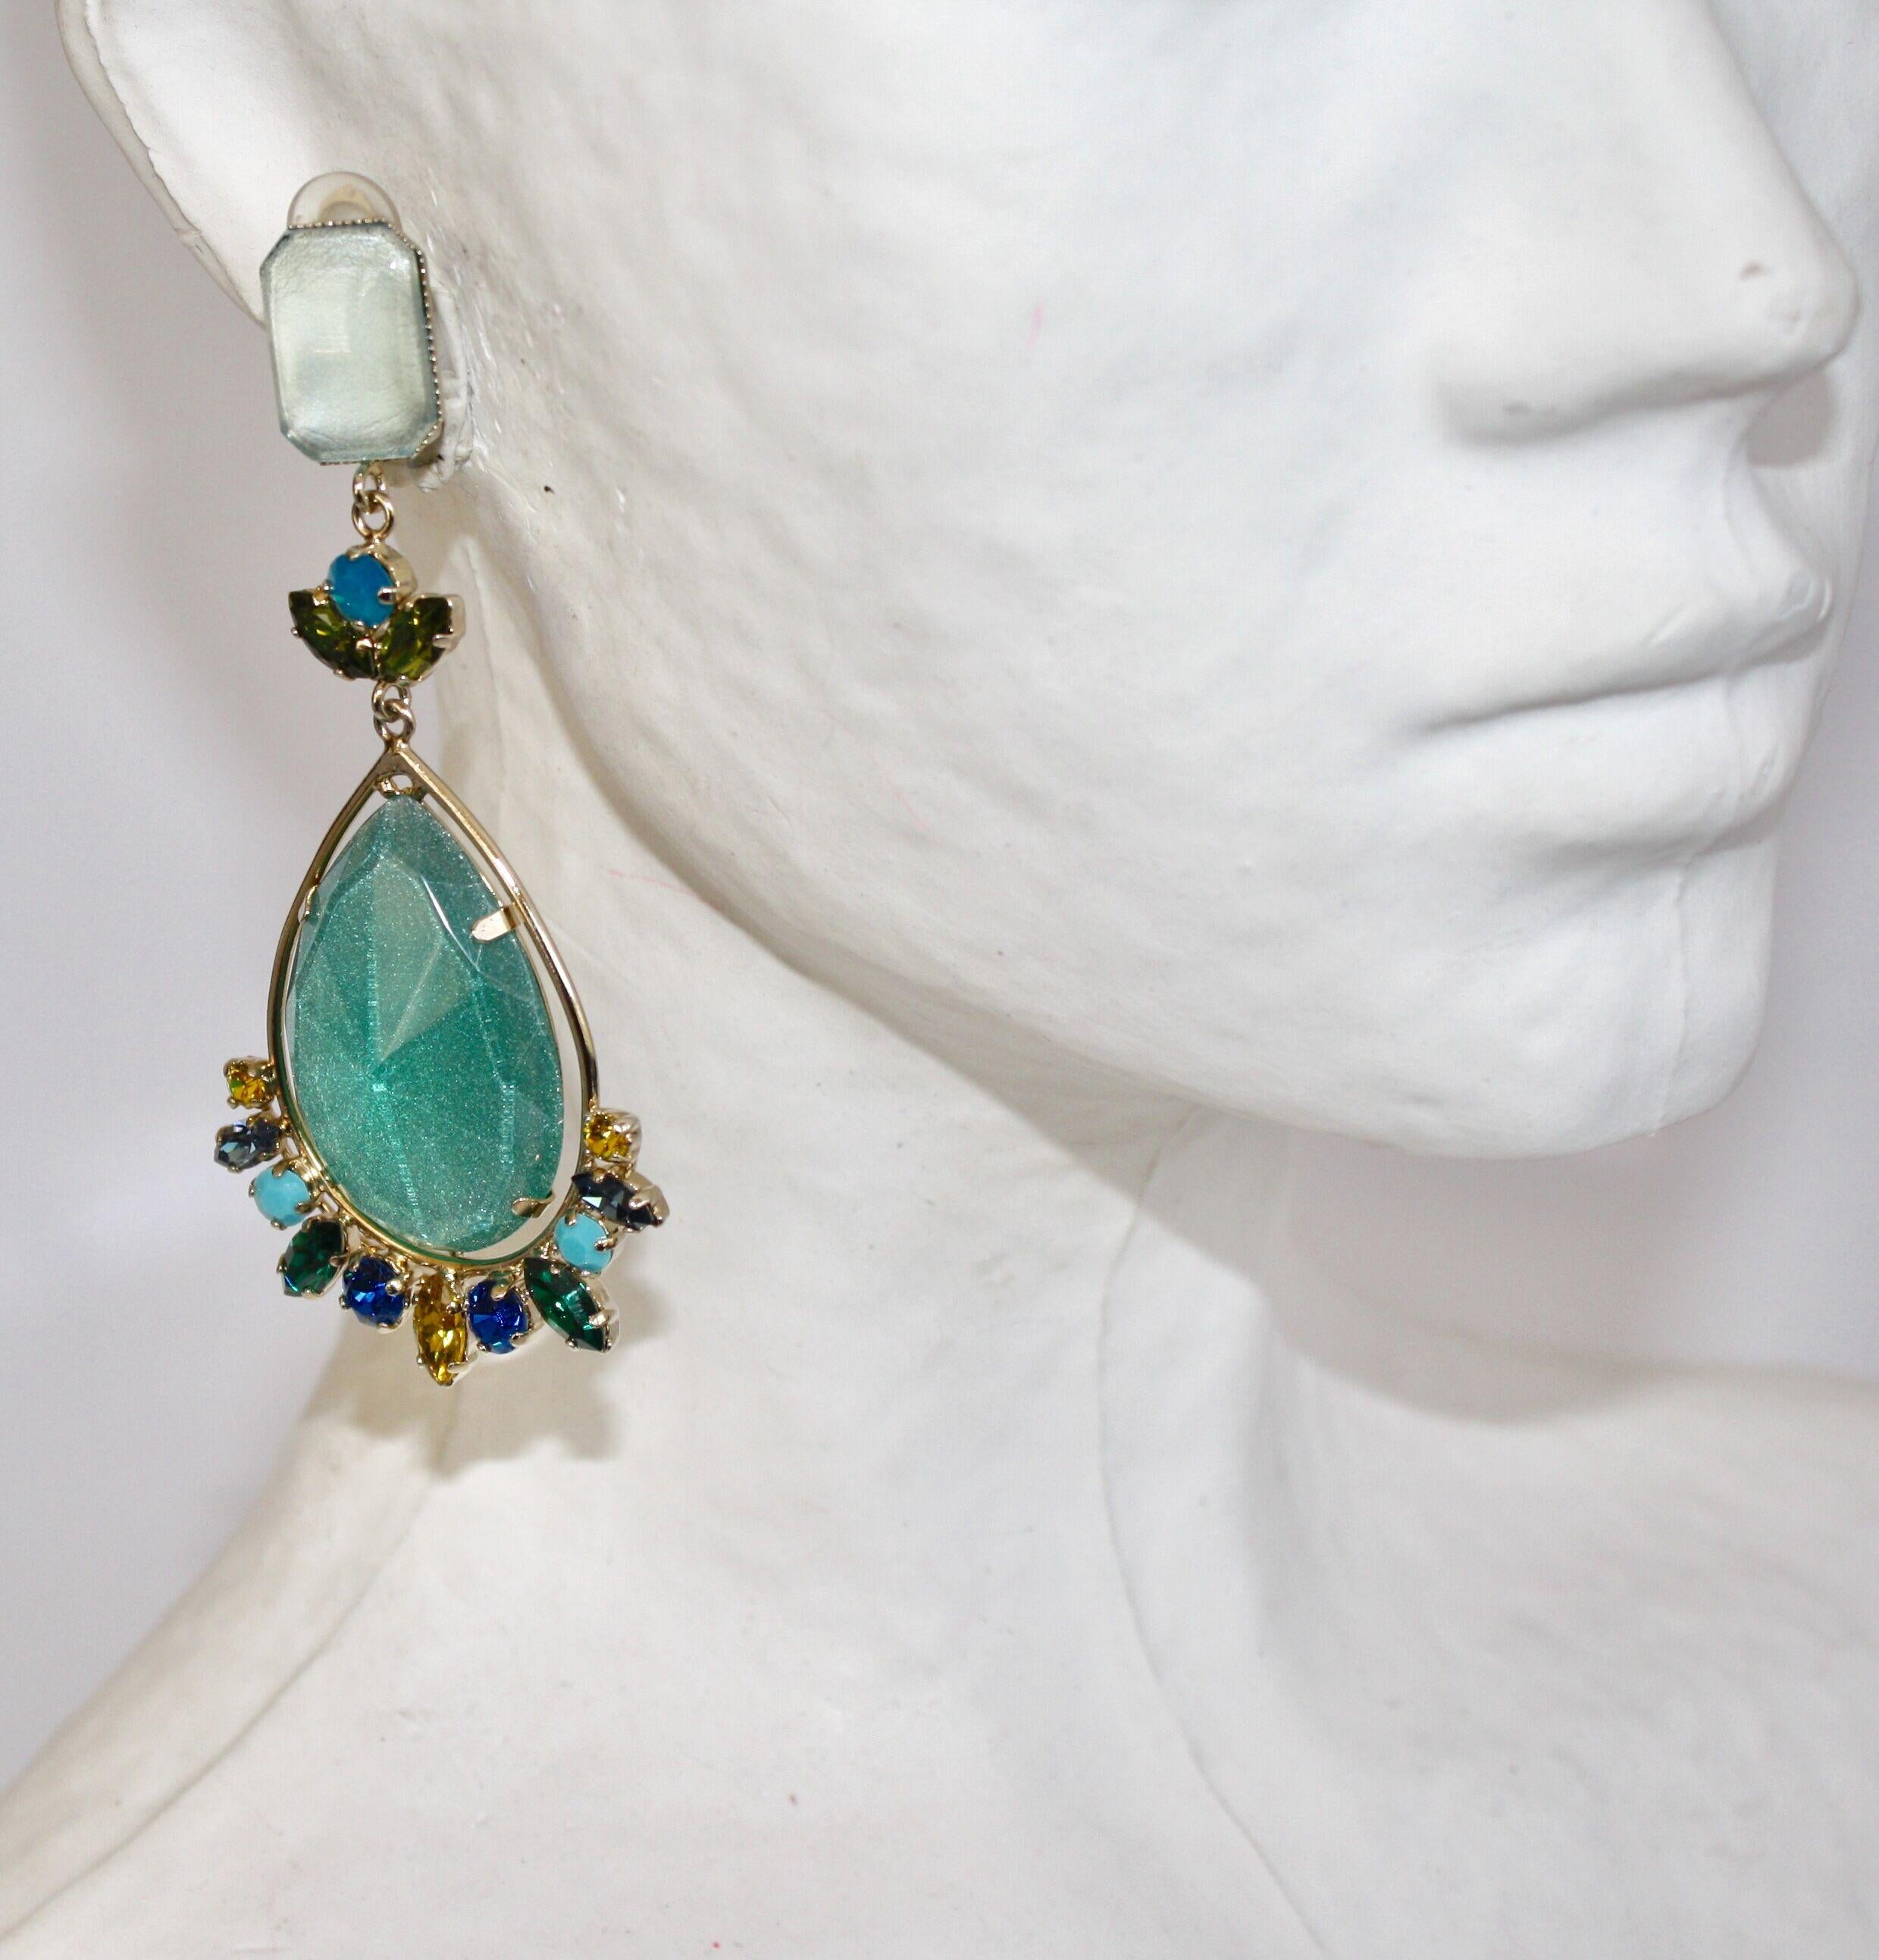 Handmade glass cabochon and Swarovski crystal clip earrings from Philippe Ferrandis. 